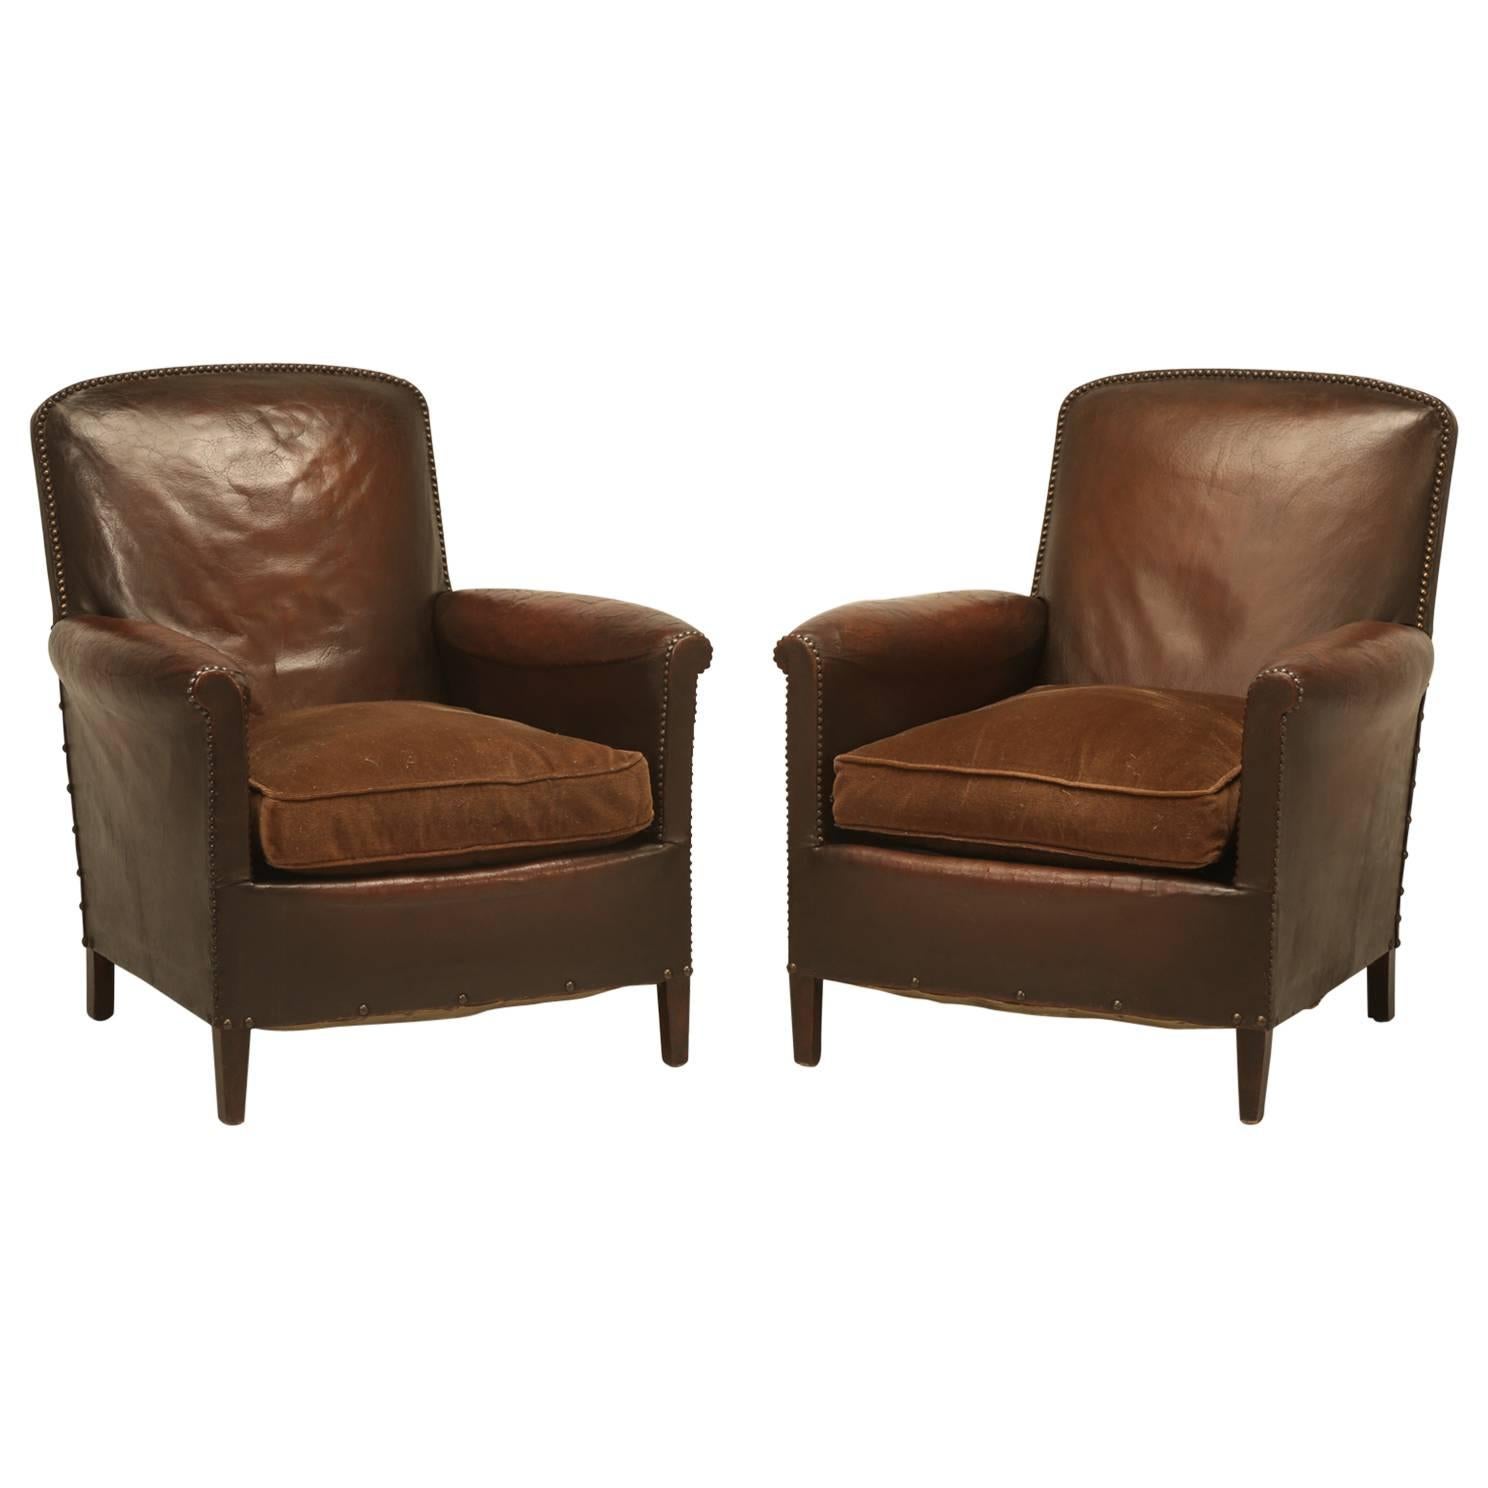 French Leather Club Chairs in Original Leather